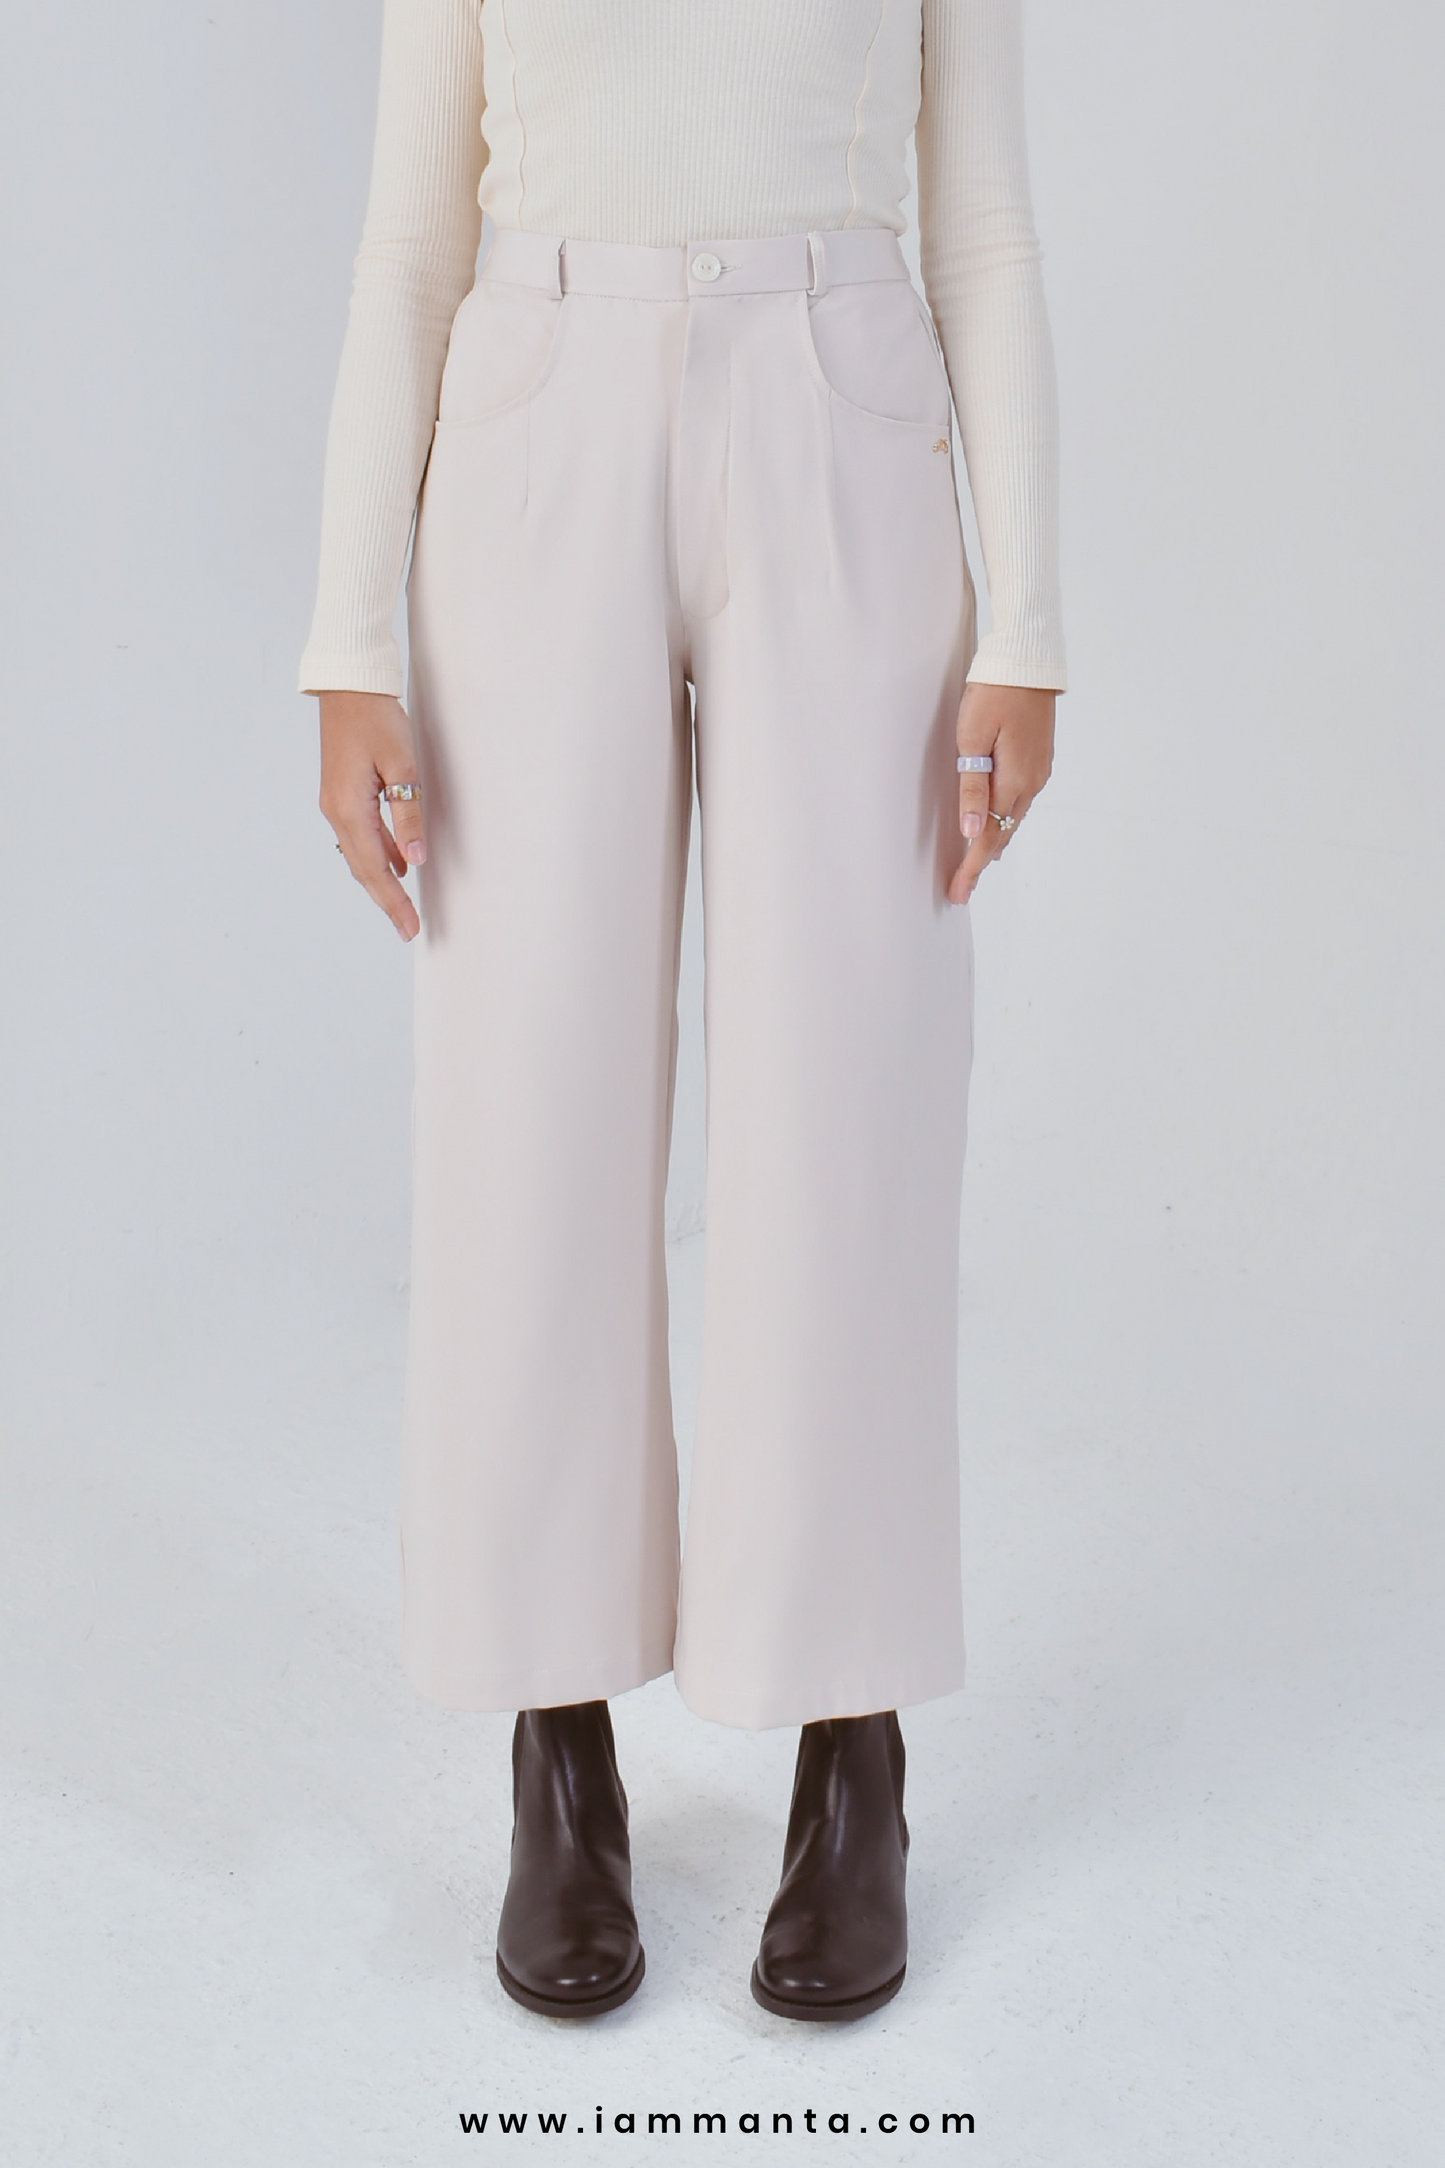 Straight Cut Sherry Pants in Cream